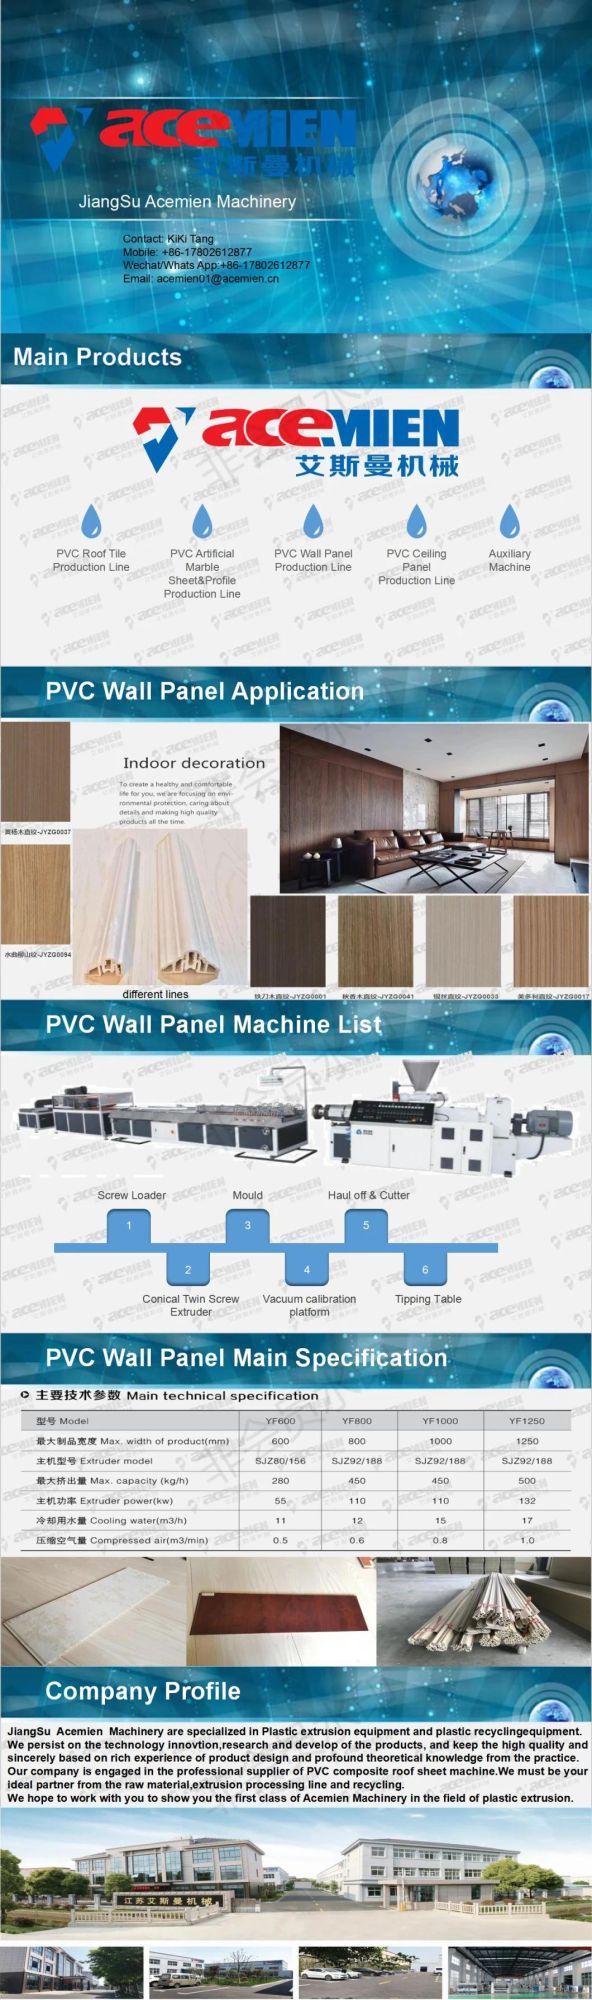 Specified Seize Plastic PVC Wall Panel Making Machine